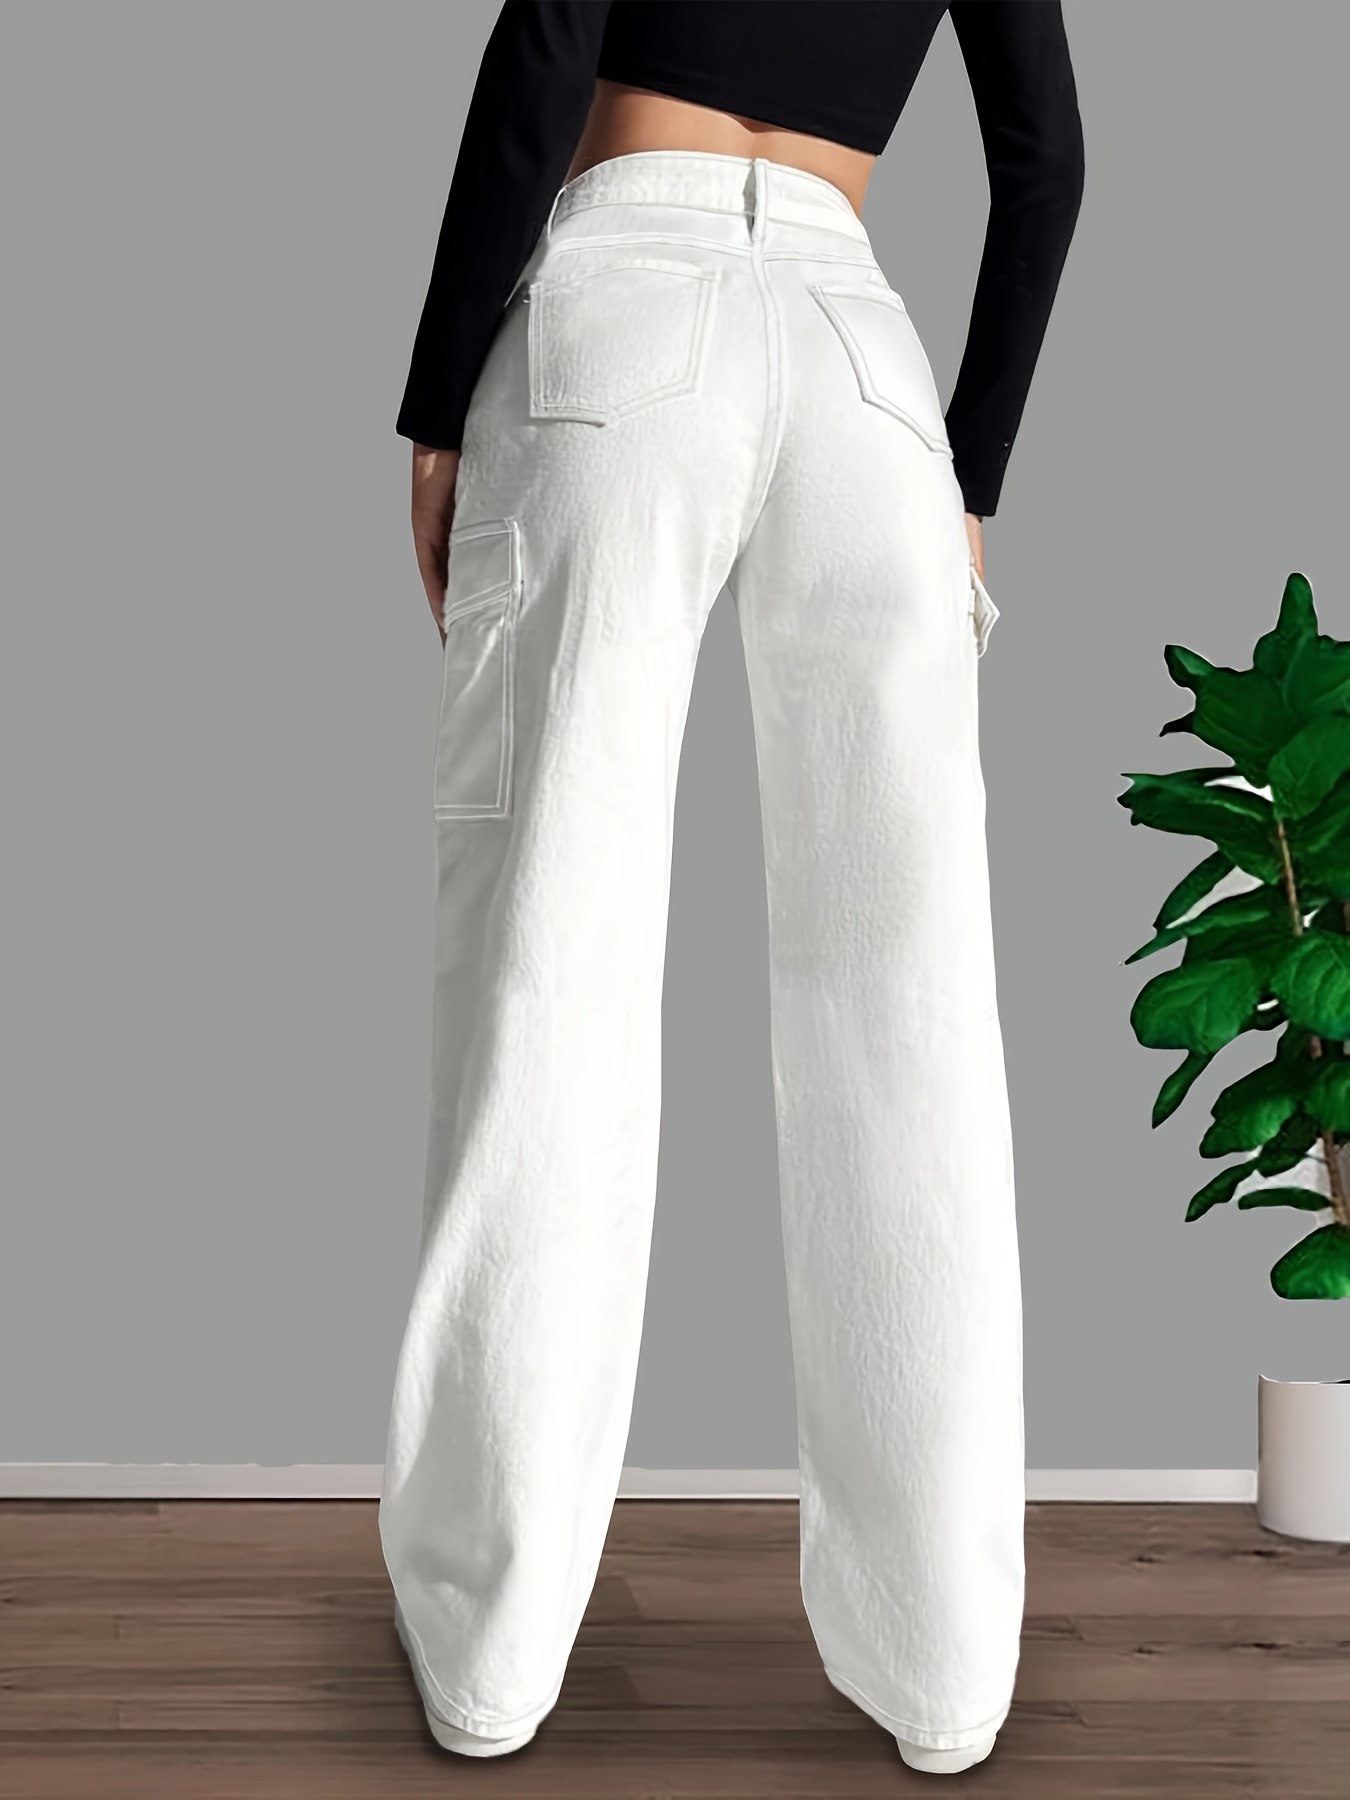 How to style high waisted trousers  White pants women, White pants outfit,  Outfits